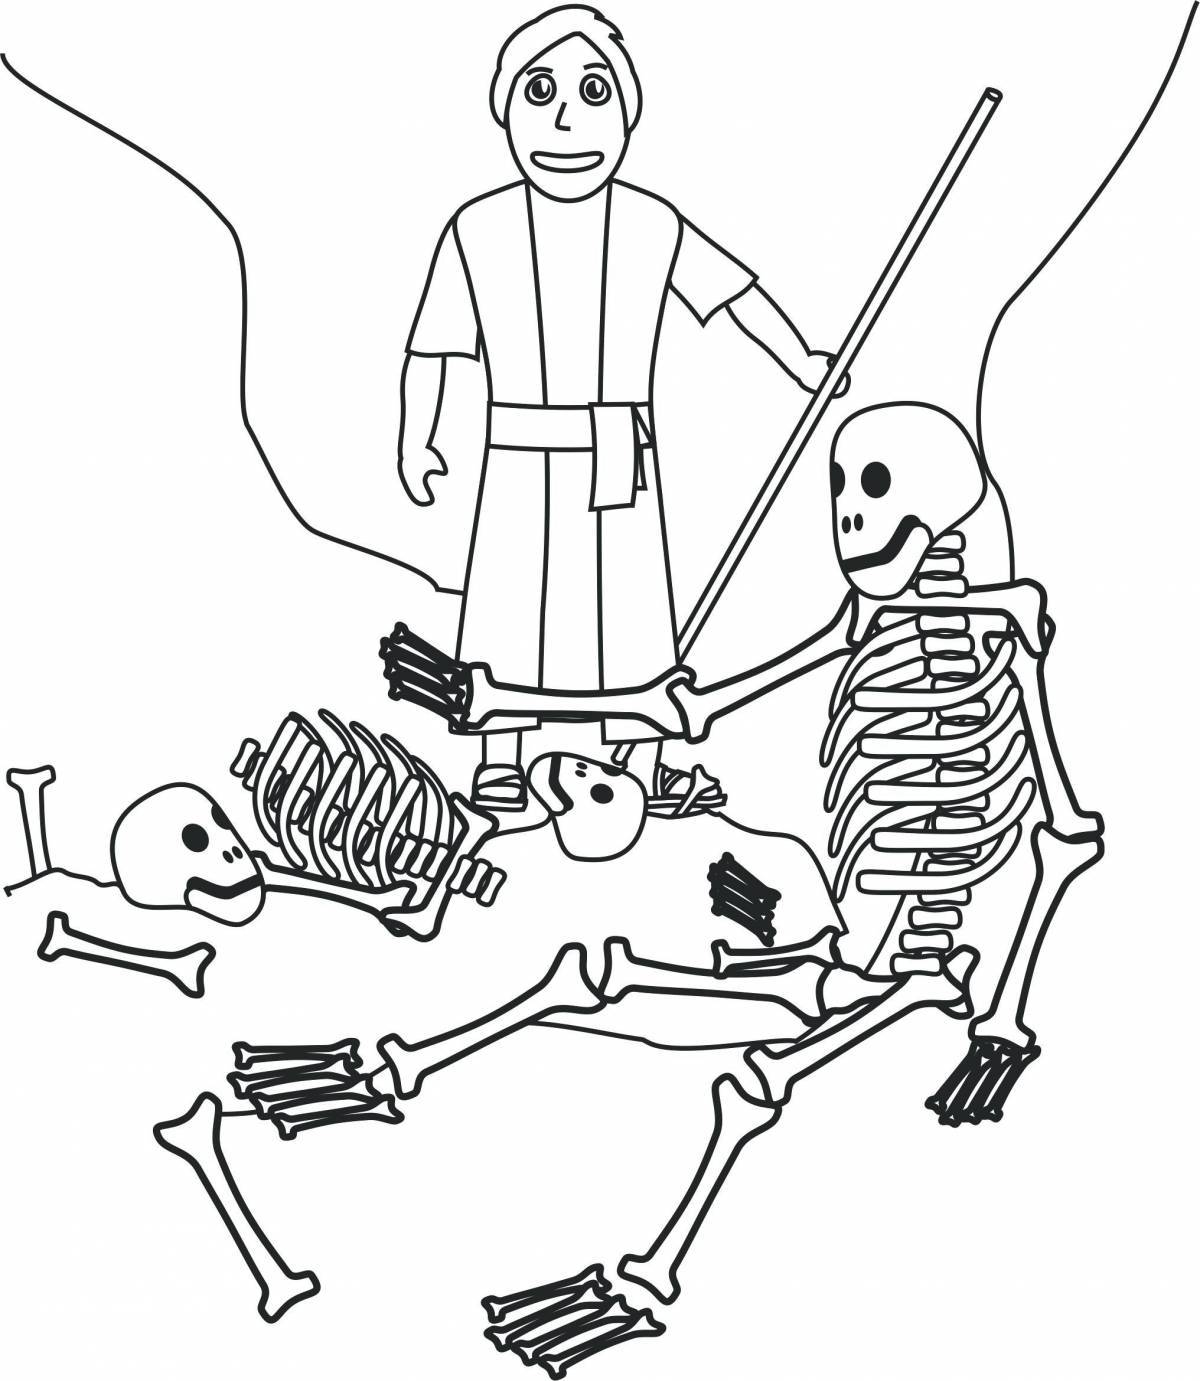 Outline Skeleton Coloring Page